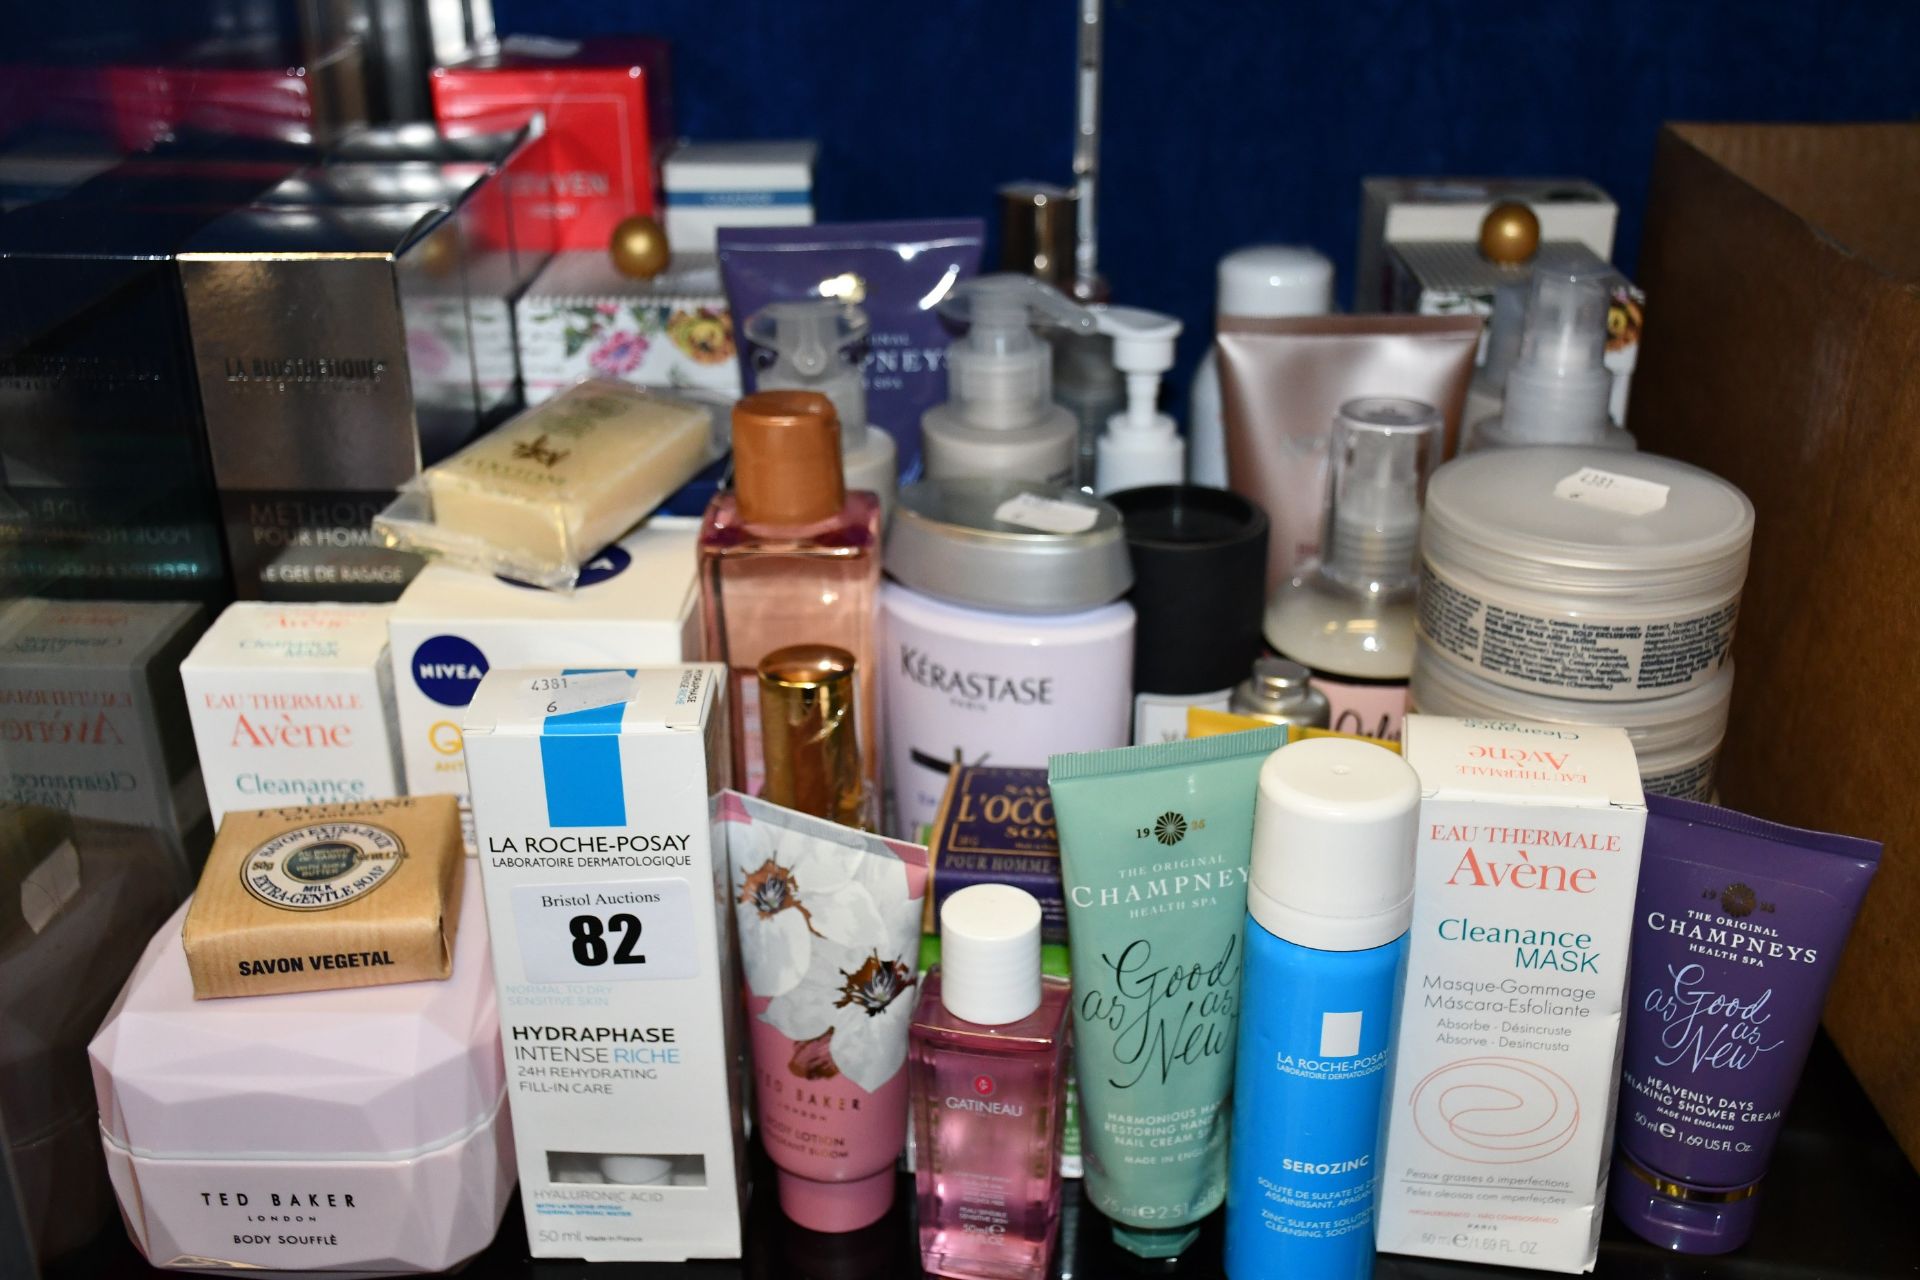 A quantity of as new toiletries to include Nivea, Avene, Champneys and L,Occitane.